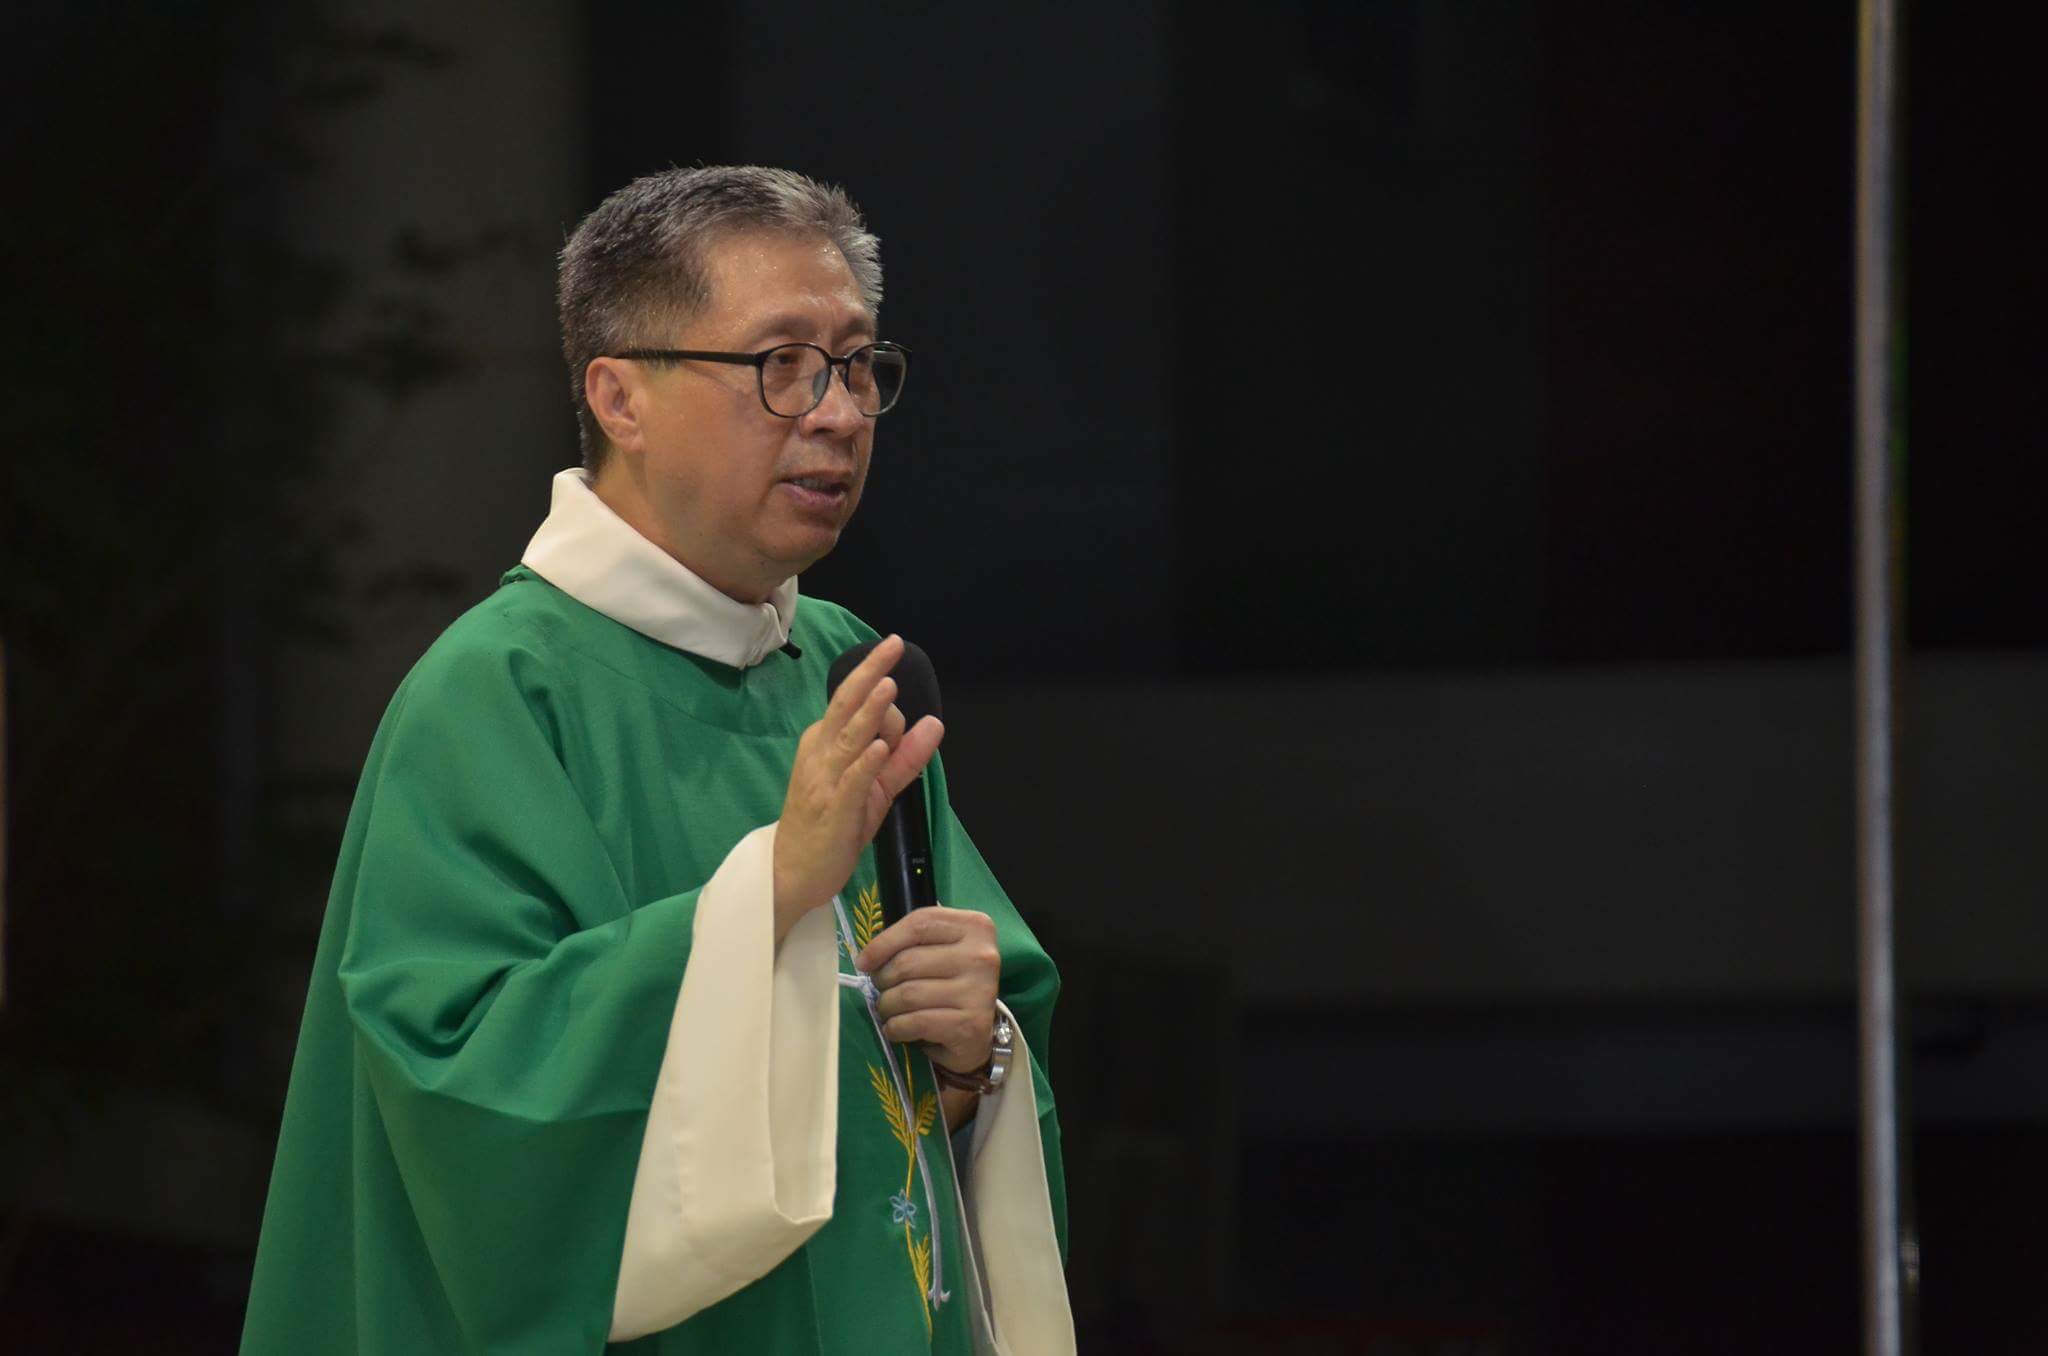 THE COMING IN BETWEEN - Homily by Fr. Dave Concepcion